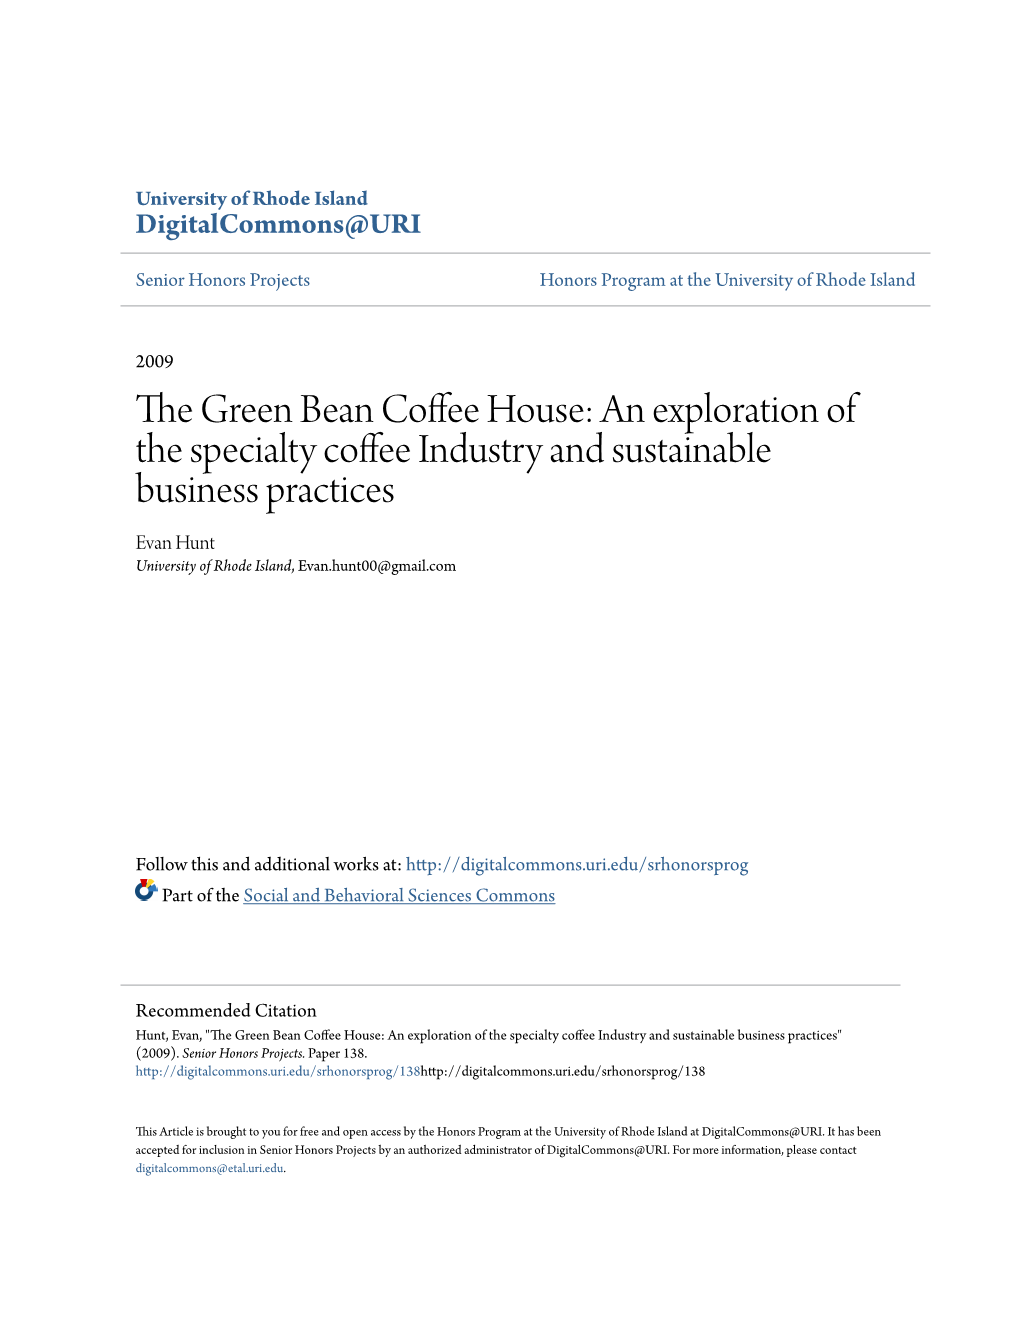 The Green Bean Coffee House: an Exploration of the Specialty Coffee Industry and Sustainable Business Practices" (2009)